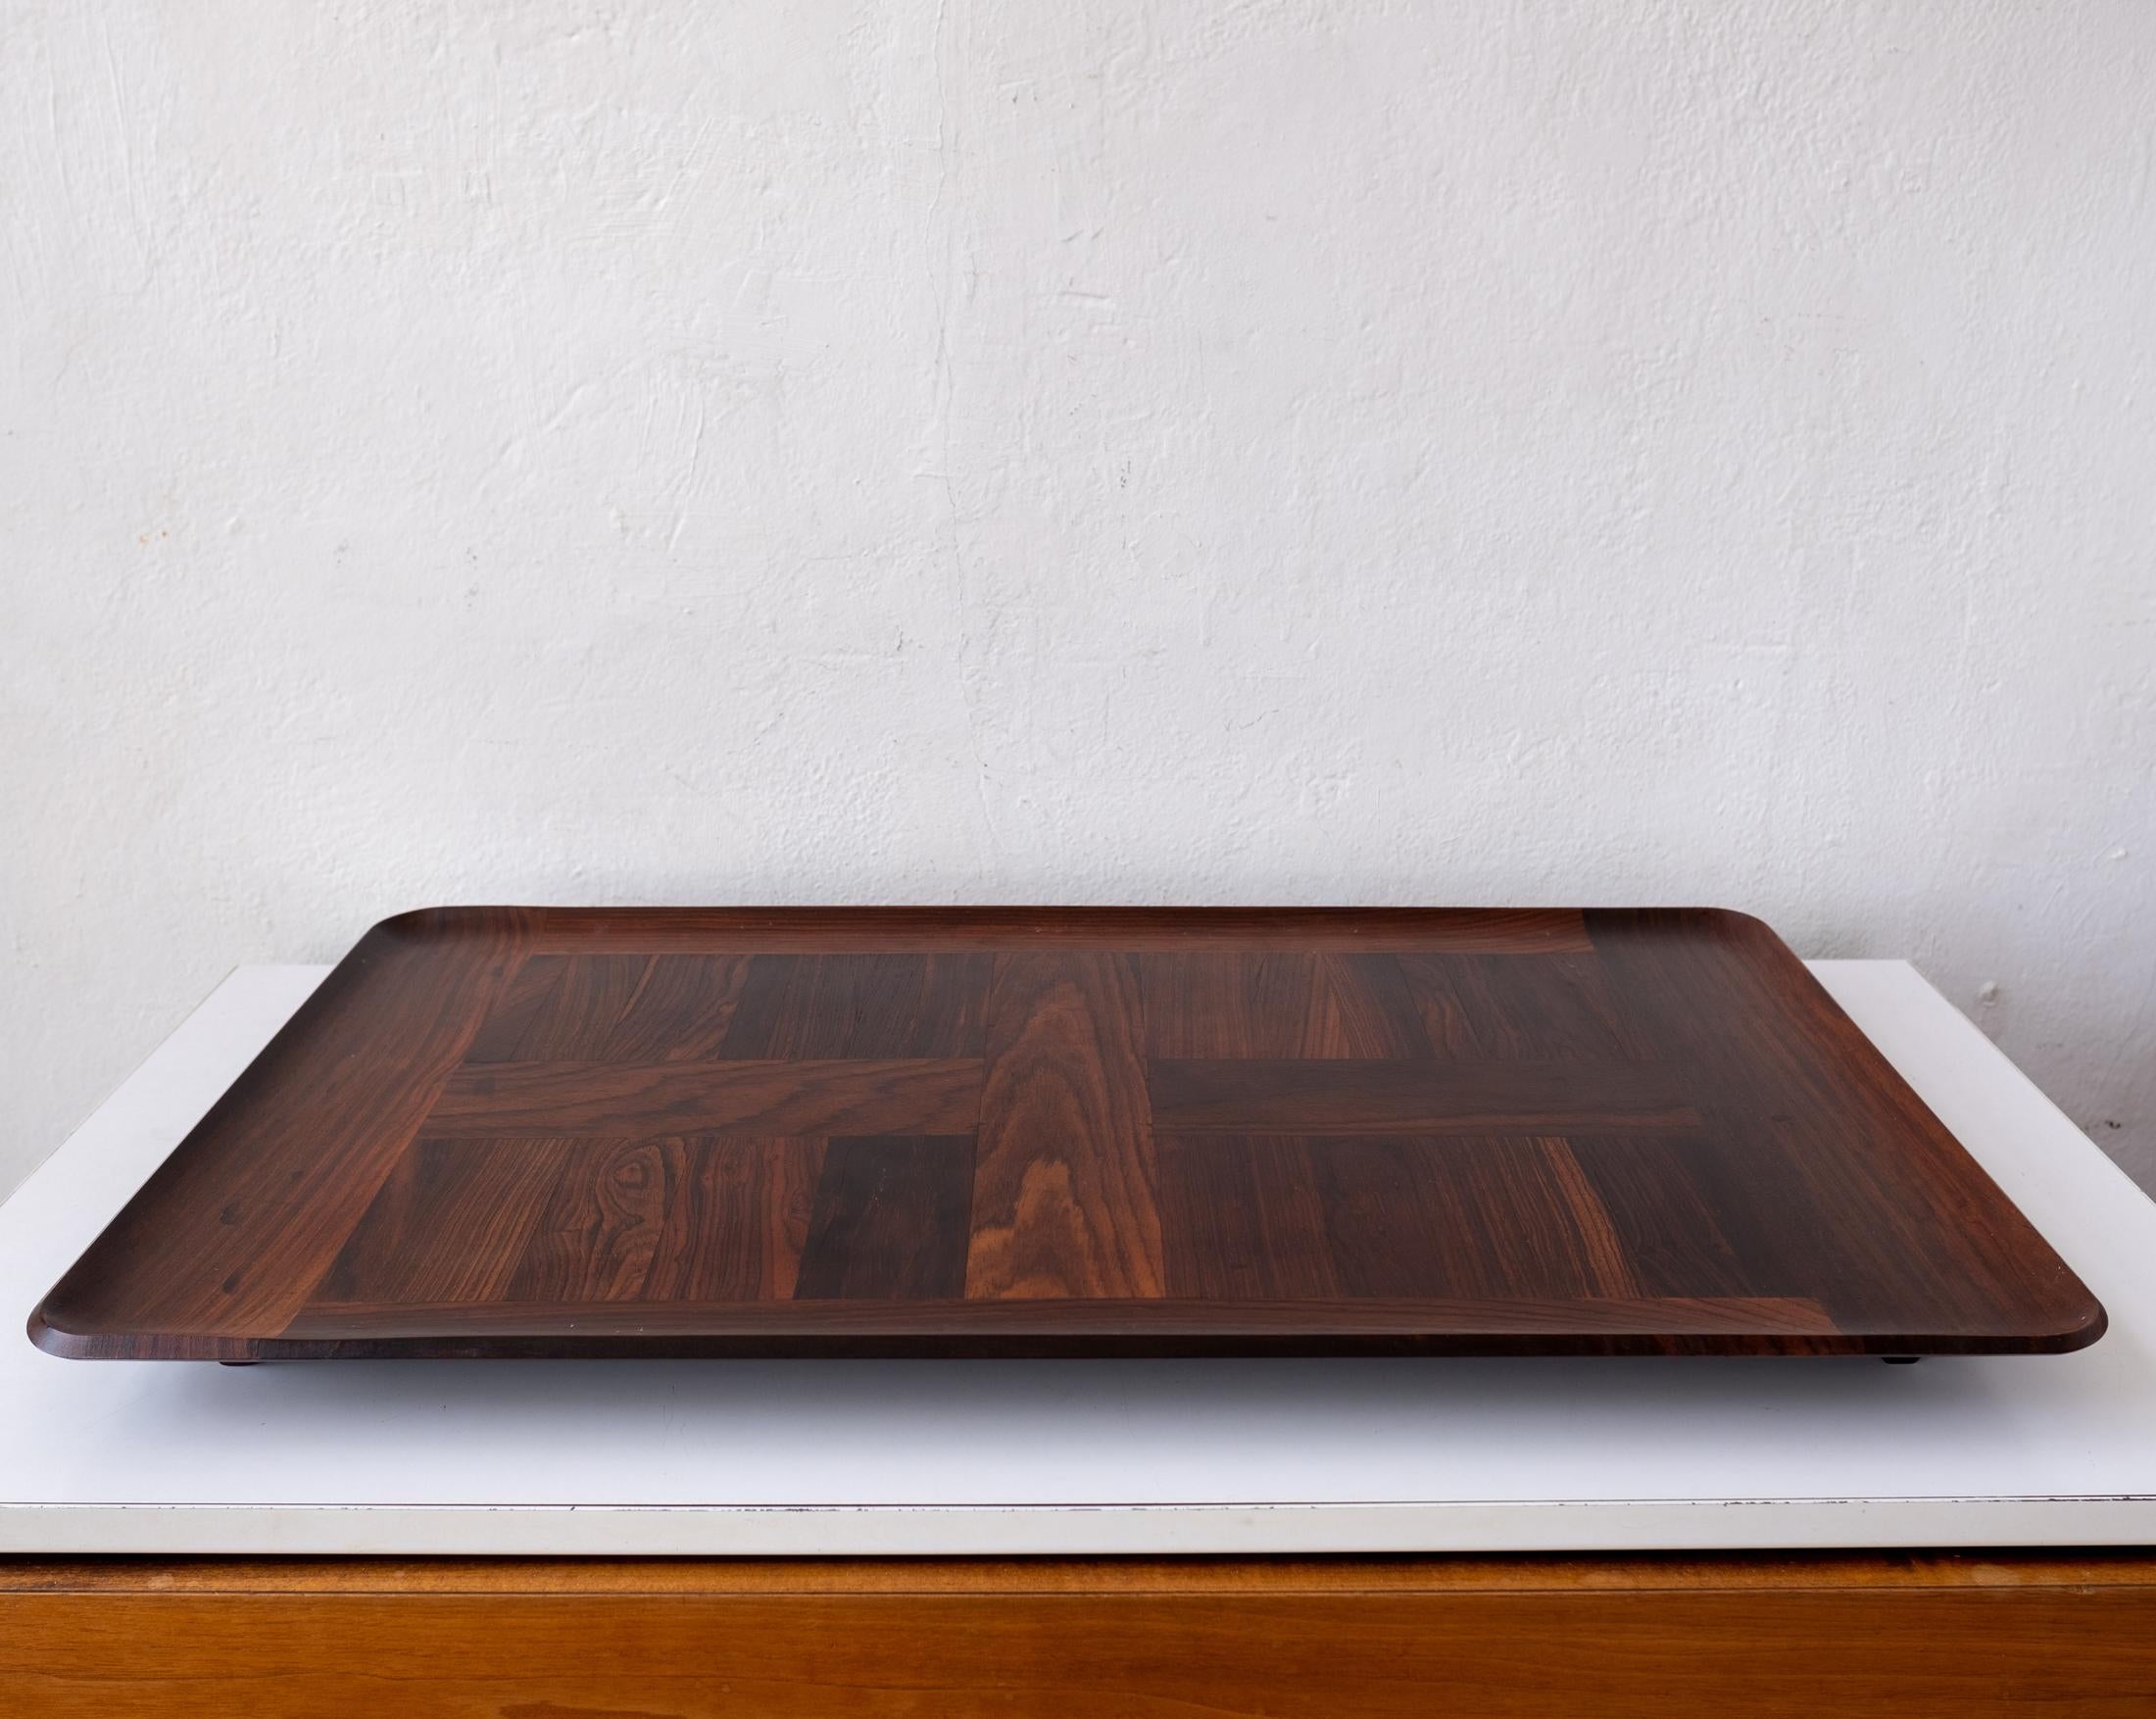 Huge tray designed by Jens Quistgaard for the Dansk Rare Woods Collection. Constructed of Cocobolo. Introduced in 1961, the Rare Woods line represented the finest designs and materials Dansk had to offer. 

Dansk described them:
Good design grows